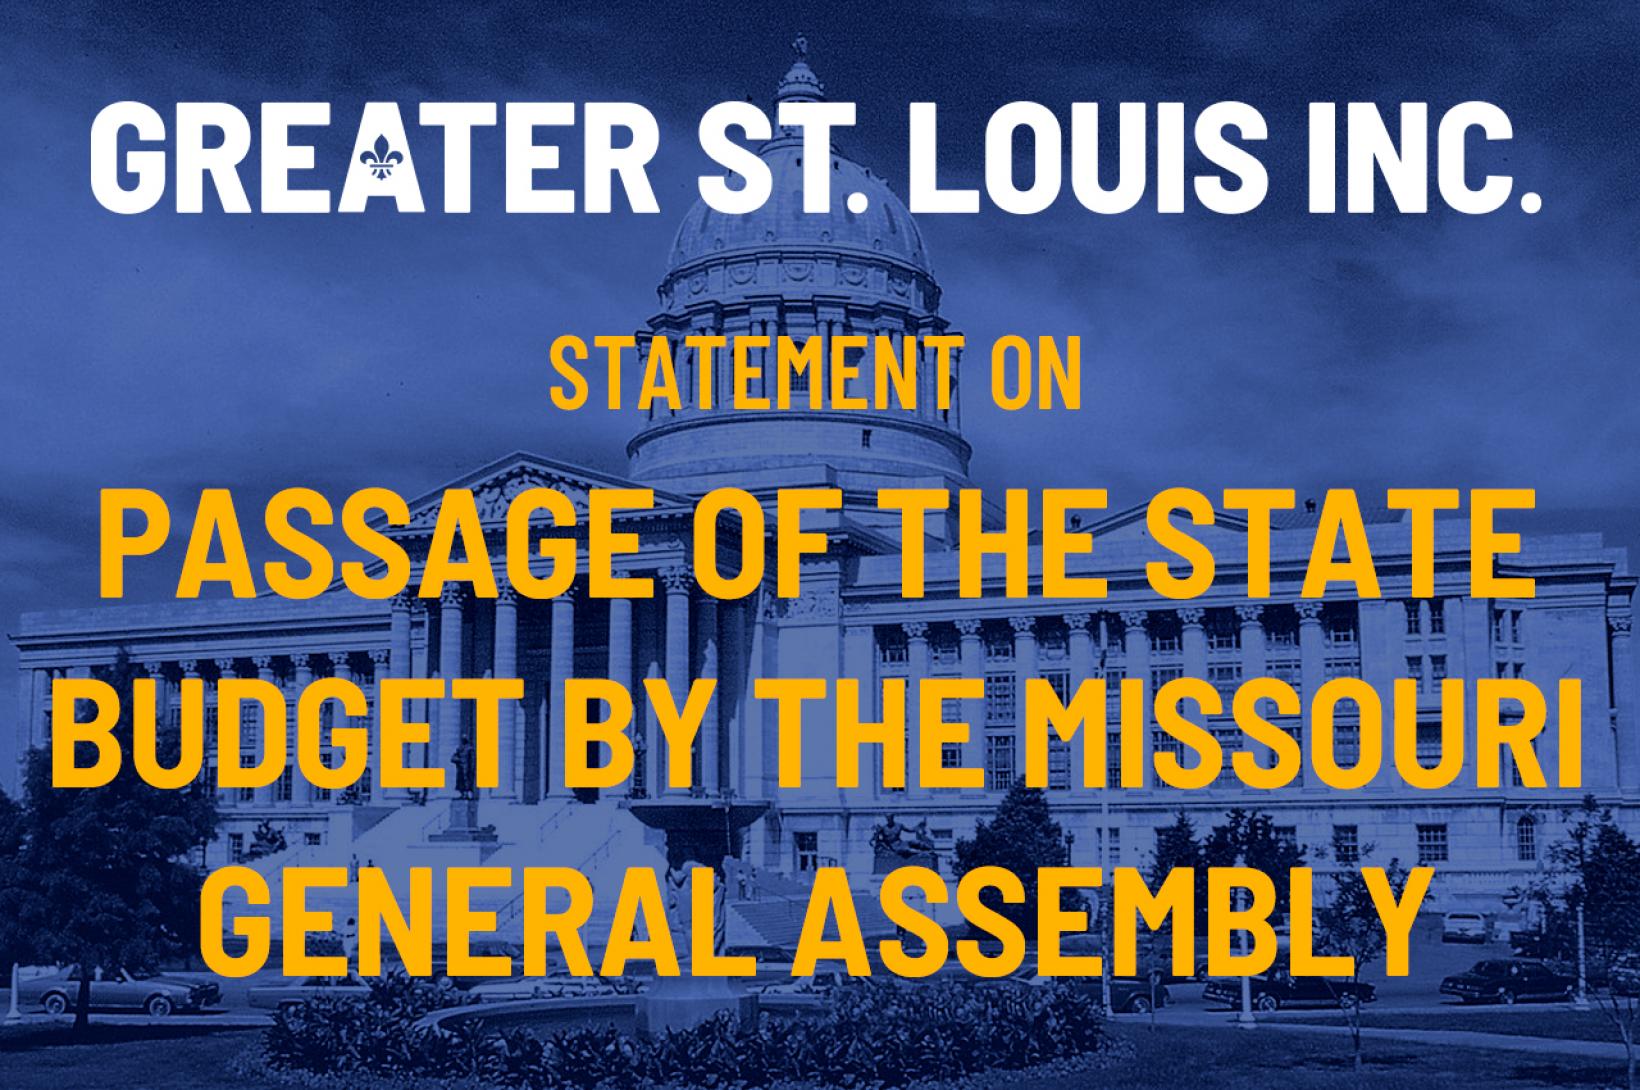 GSL statement on the passage of the state budget by the Missouri General Assembly